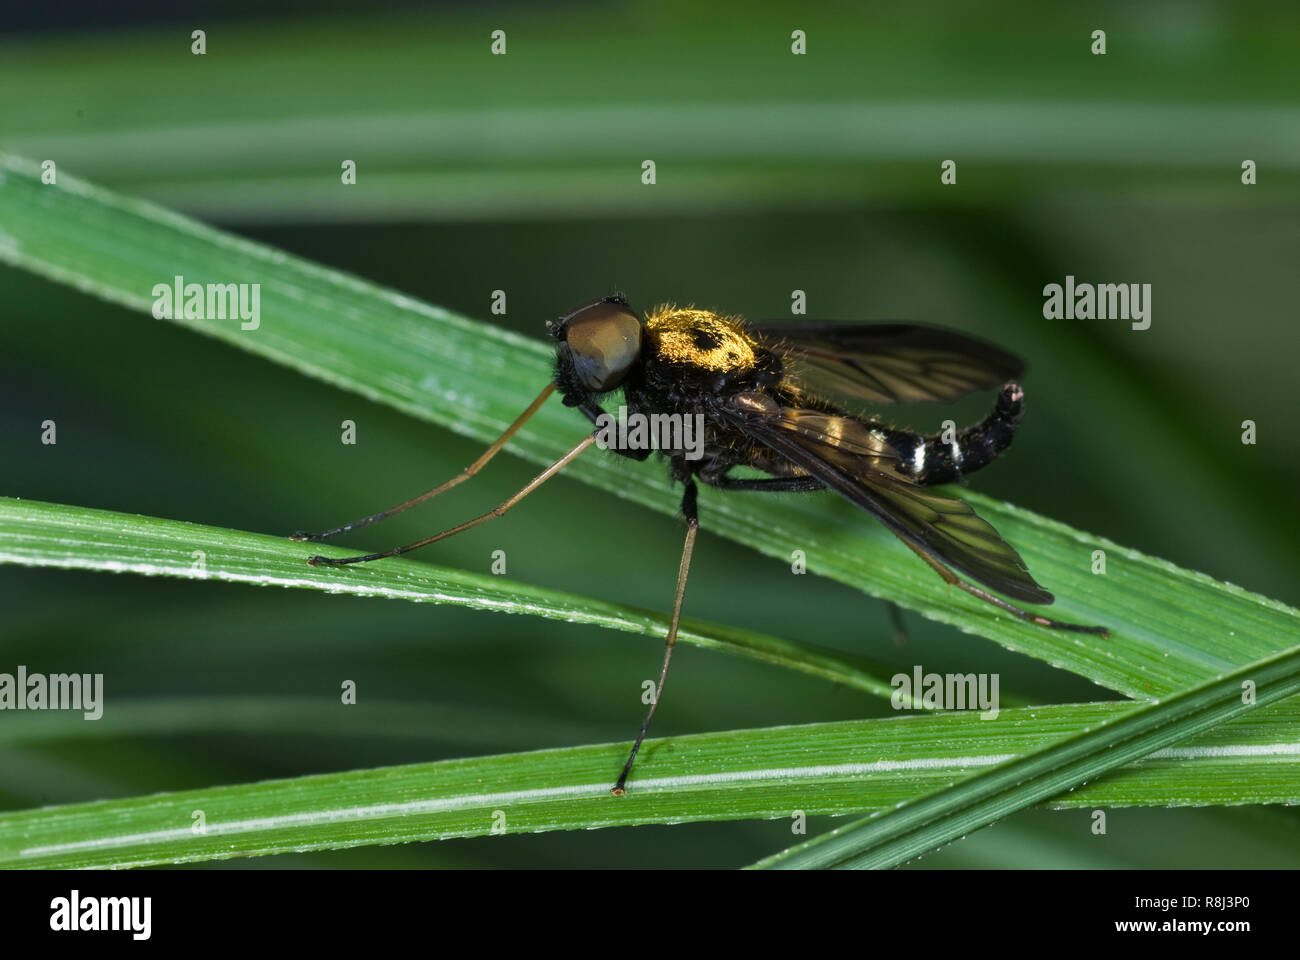 Golden-backed snipe fly (Chrysophilus thoracicus) resting on grass blades. This fly's large compound eyes nearly cover its entire head. Stock Photo